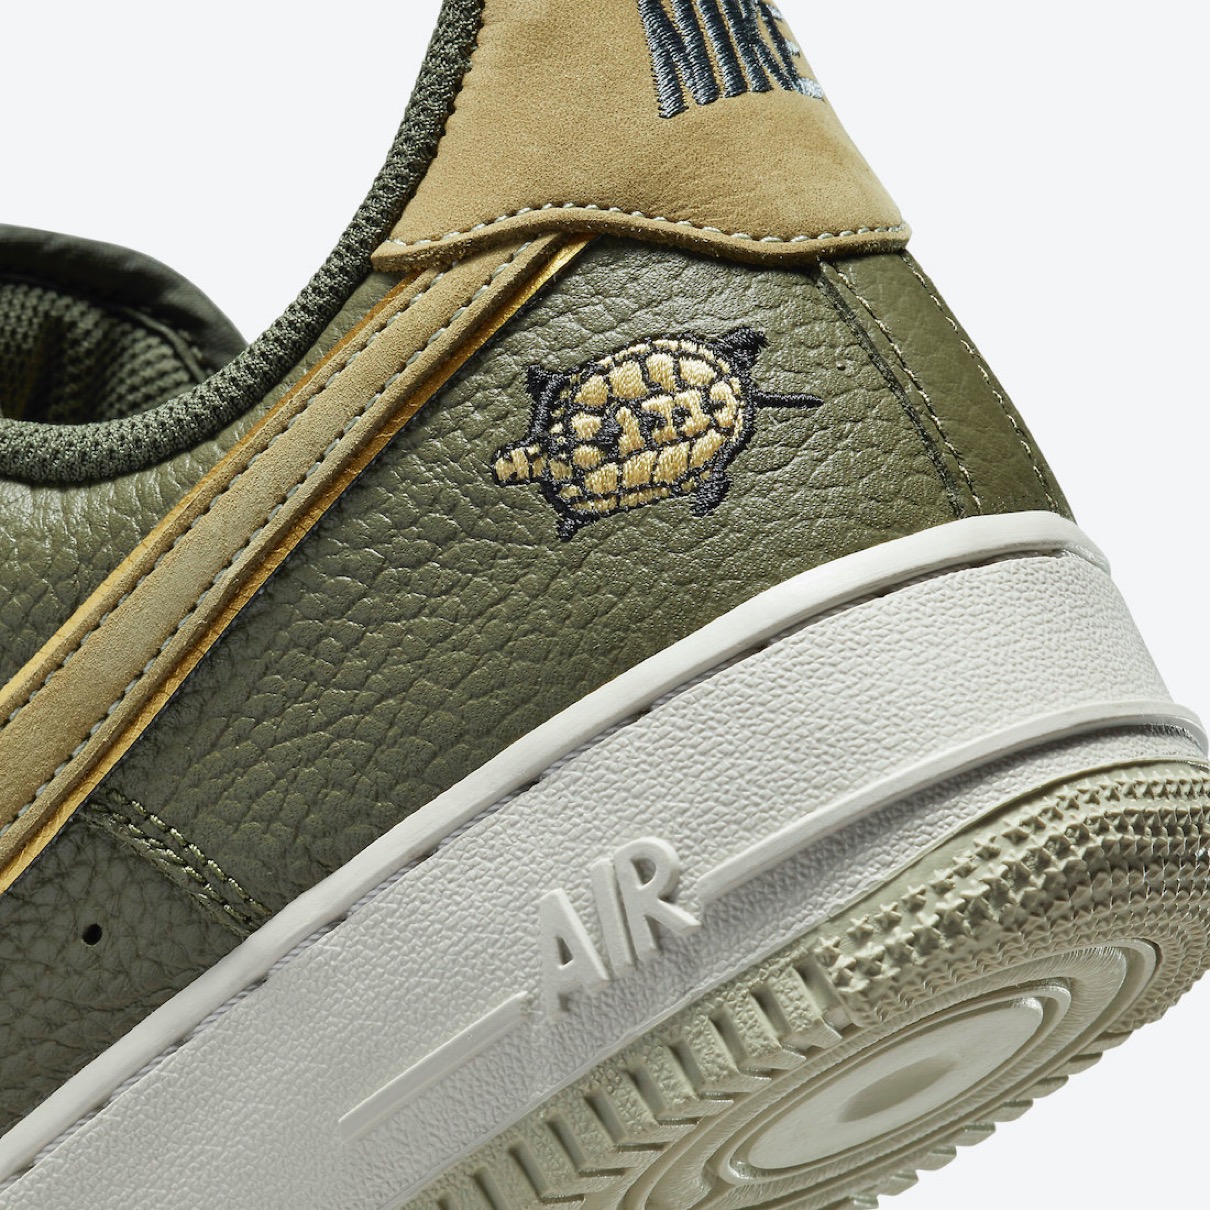 Nike】亀をモチーフにしたAir Force 1 '07 LX “Turtle”が国内10月1日に 